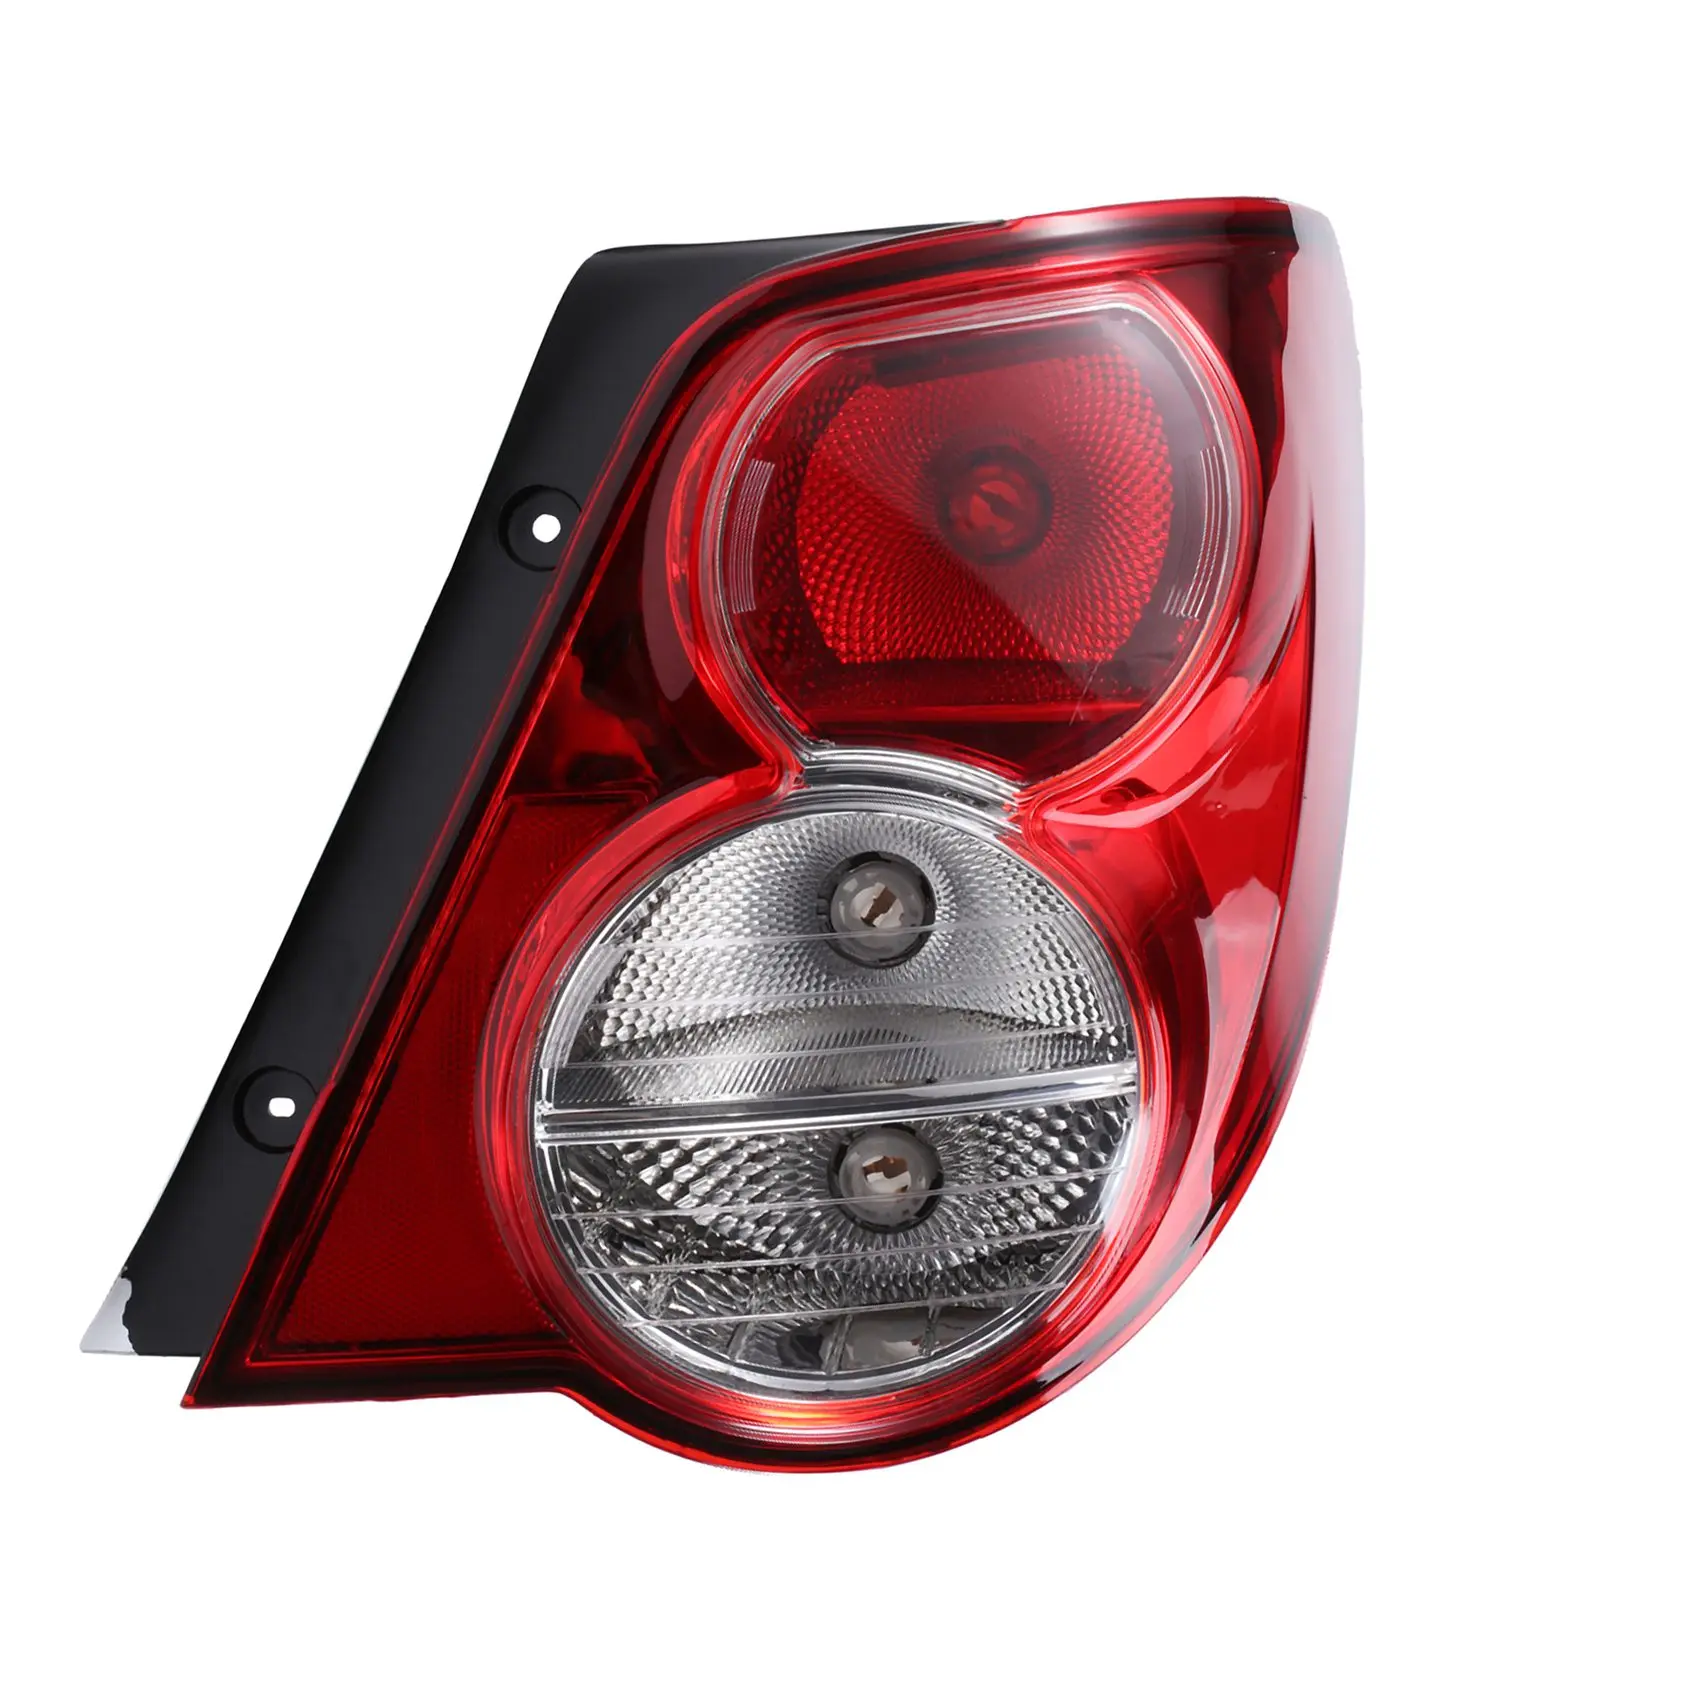 

Car Right Rear Bumper Tail Lamp Driving Stop Brake Light for Chevrolet Chevy Sonic 4D Aveo 4D 2011-2013 96830974